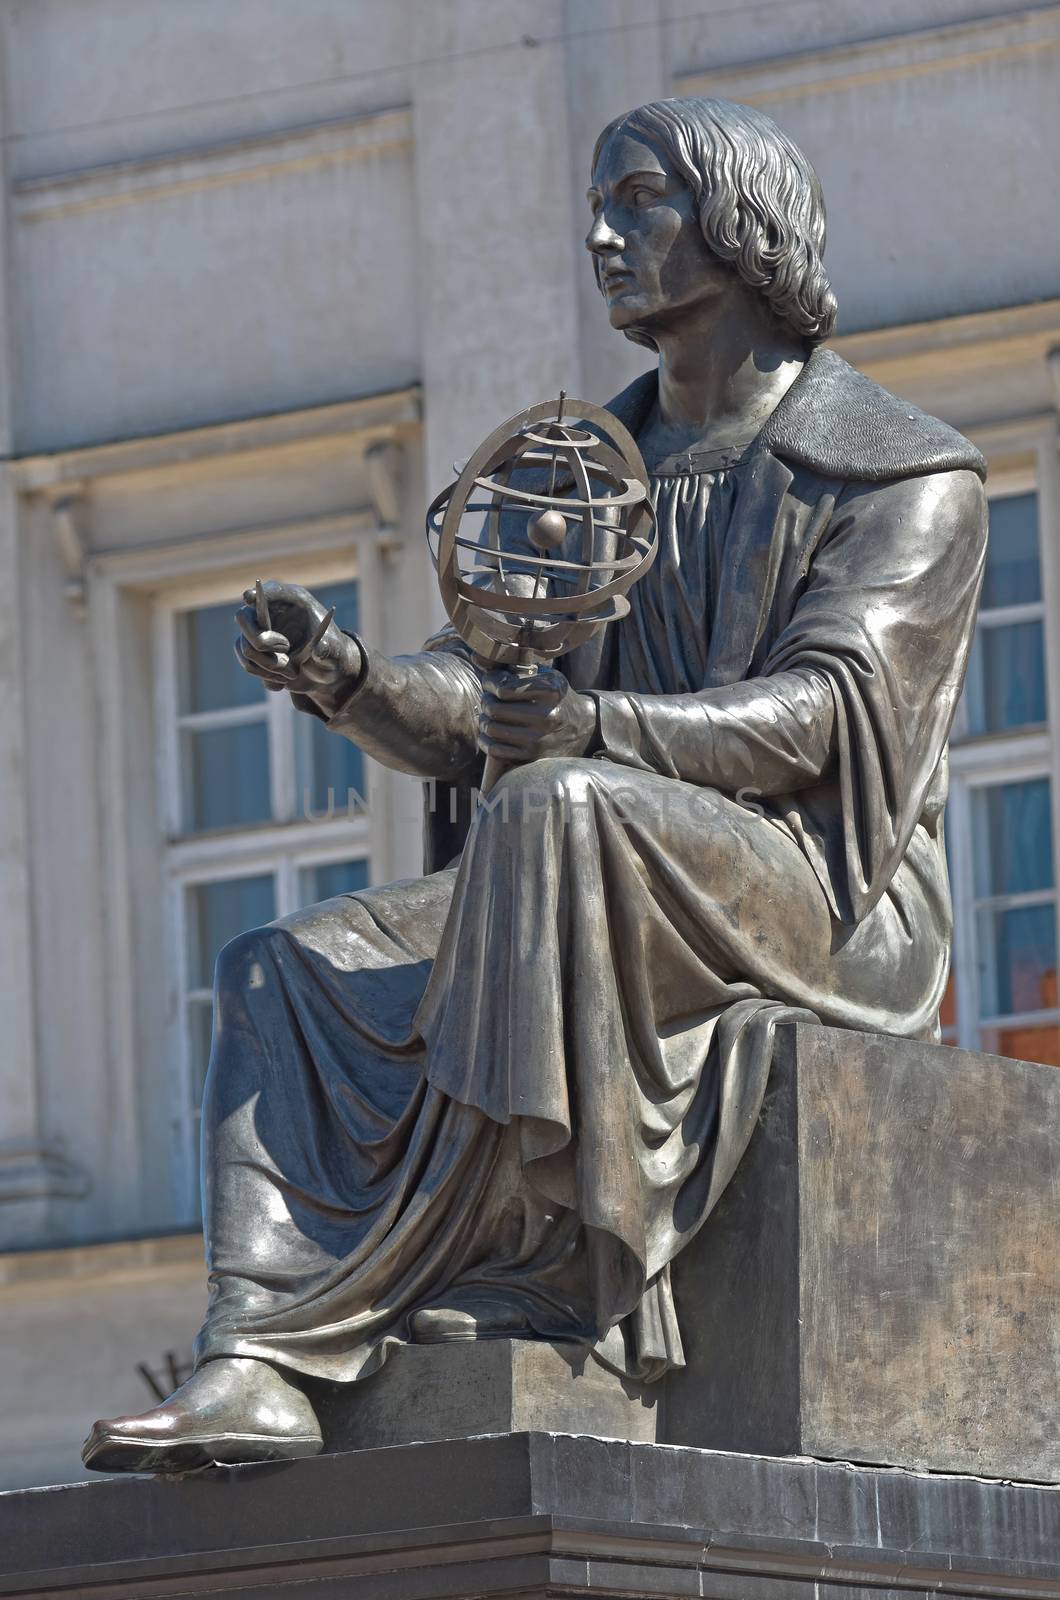 The bronze statue of astronomer Nicolas Copernicus - by Bertel Thorvaldsen, 1830 - in front of the Polish Academy of Sciences, Warsaw, Poland.